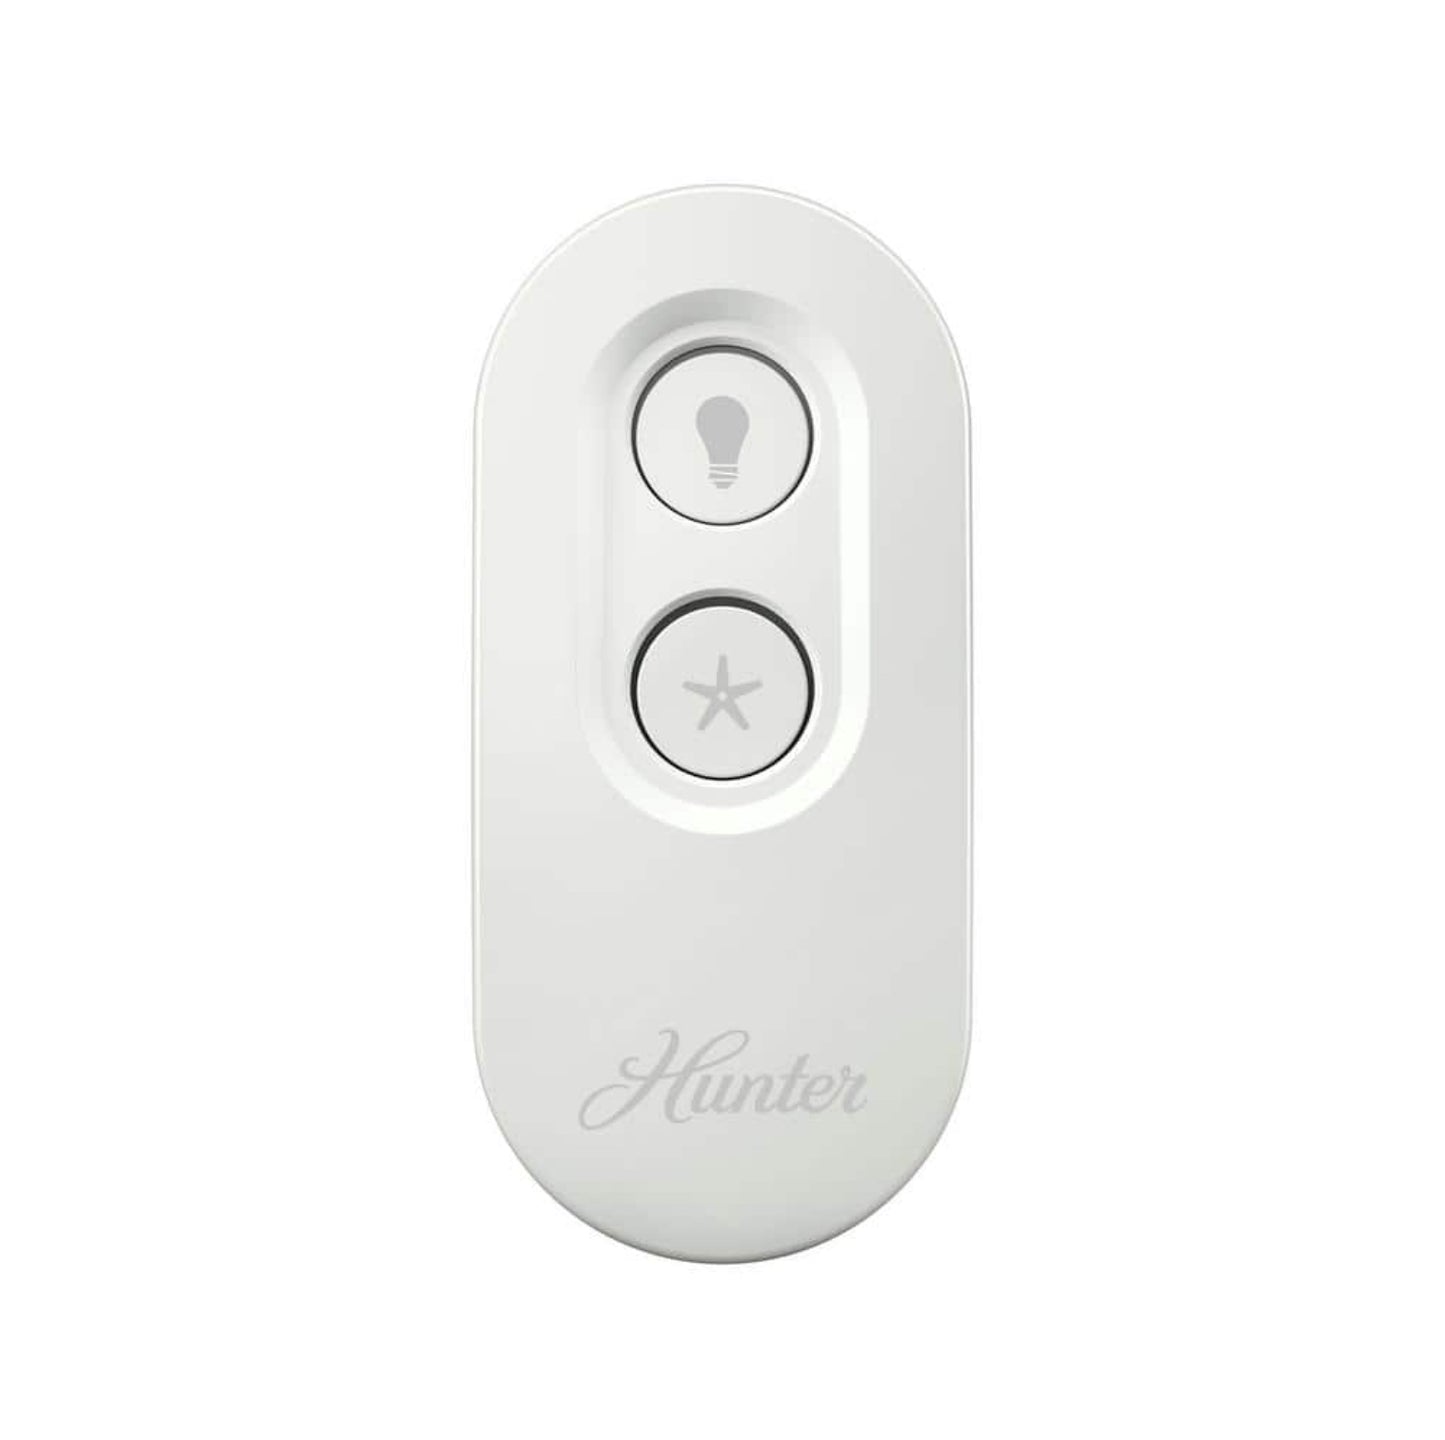 Hunter Universal On/Off Damp Rated Ceiling Fan Remote Control White Damaged Box